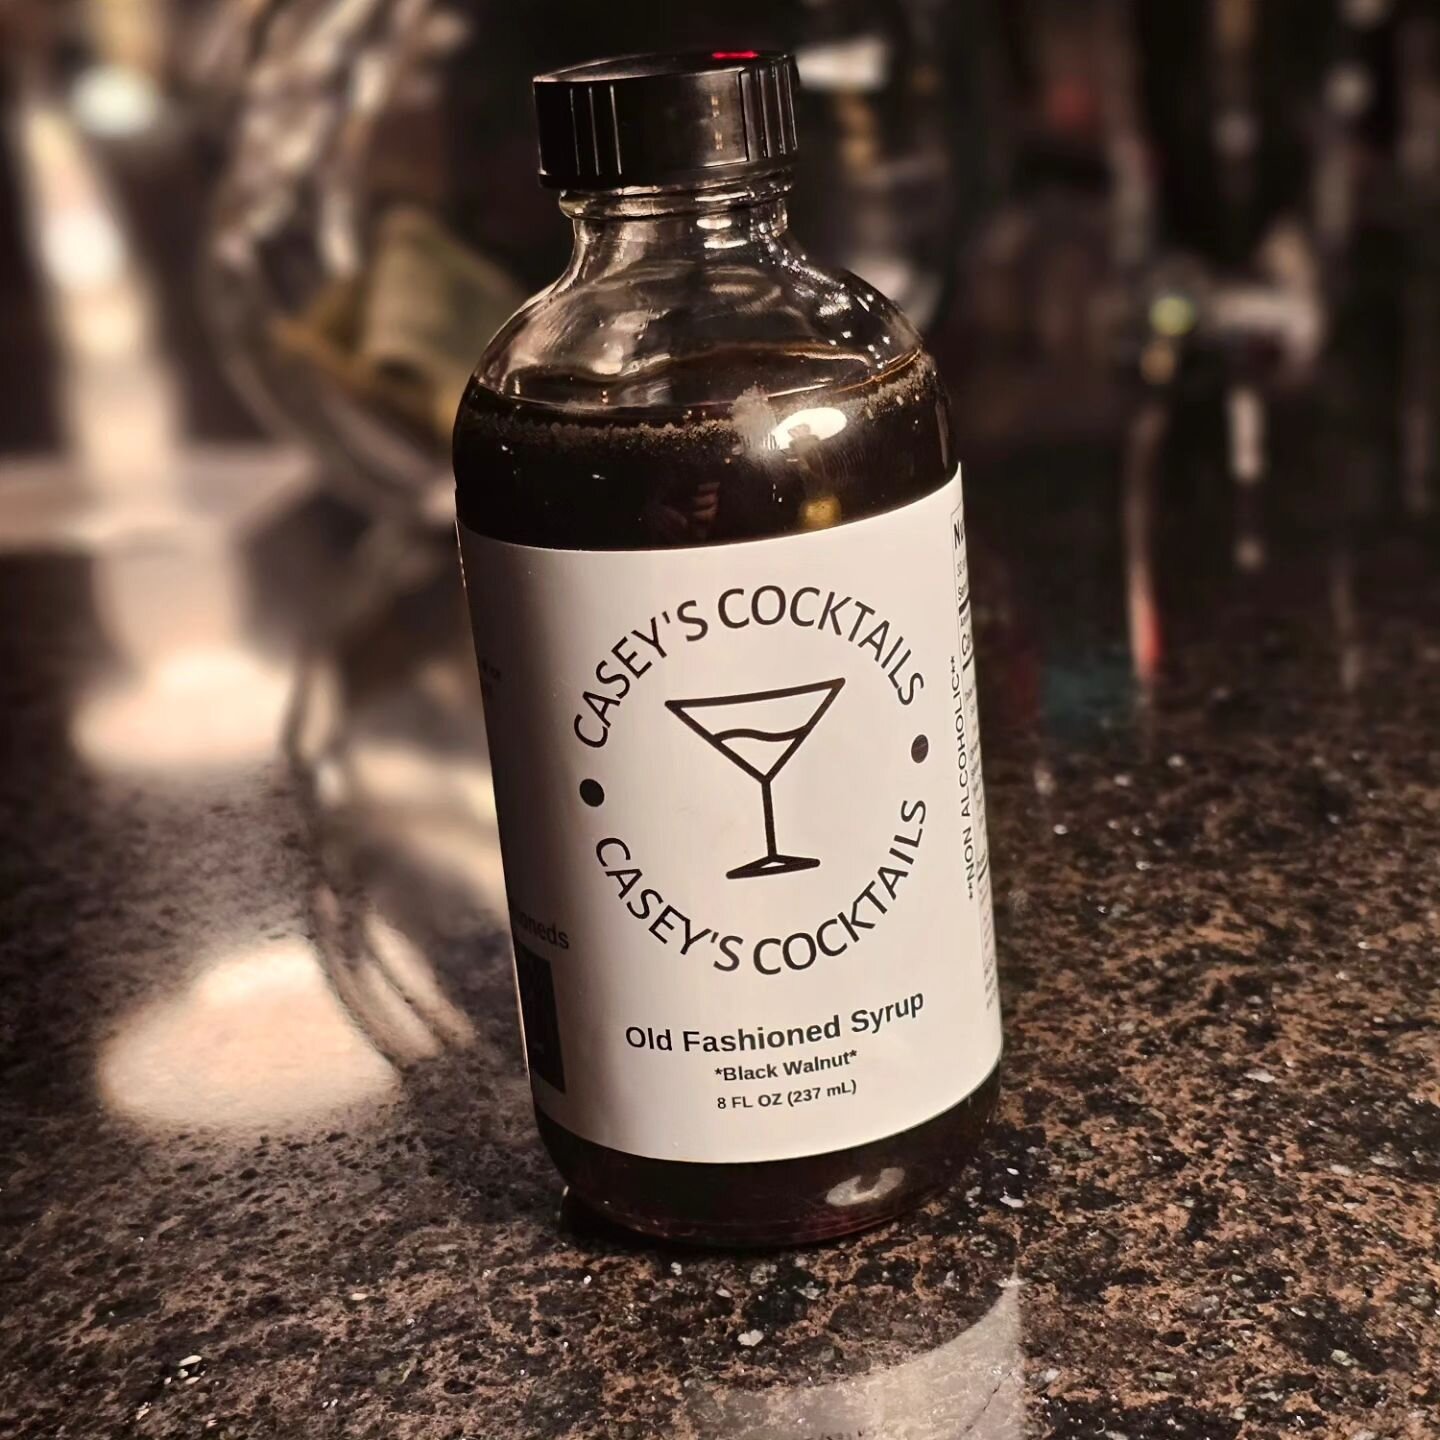 The Black Walnut Old Fashioned Syrup is available for pre-order! We're down here for the @nohompls poker tournament and this is the place to be! Good food, good drinks, and great poker! #poker #oldfashioned #northloop